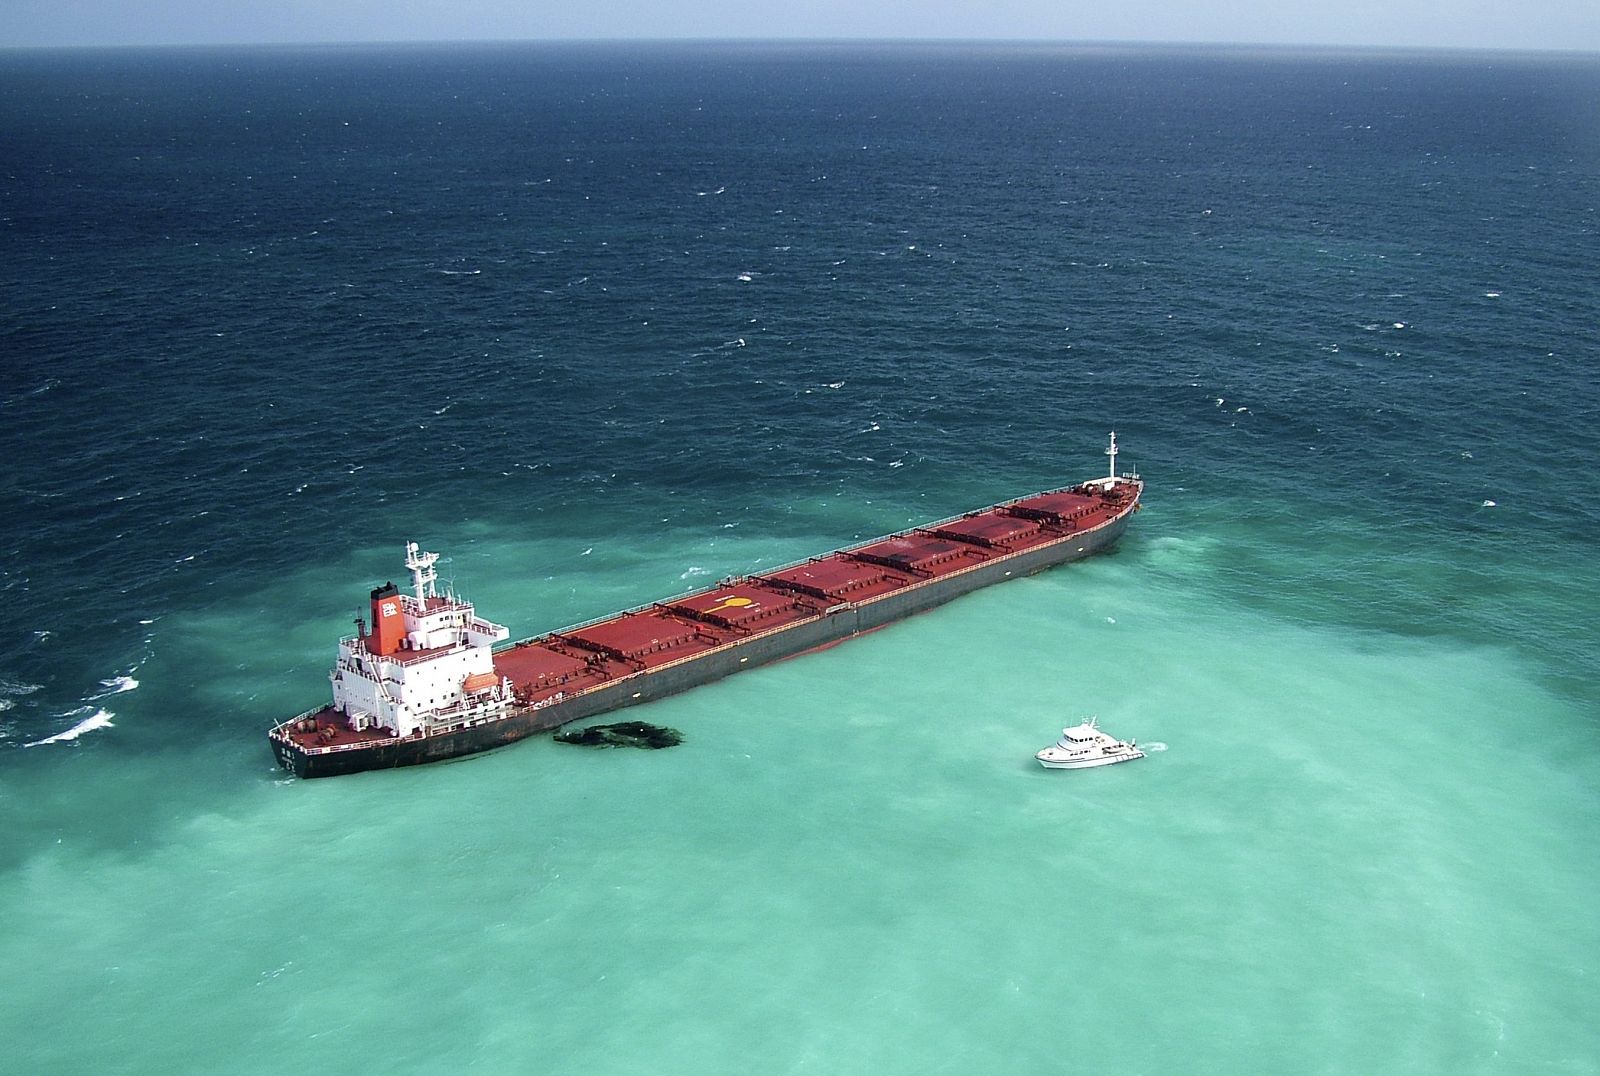 Oil is seen next to the 230m-long bulk coal carrier Shen Neng I about 70 km east of Great Keppel Island